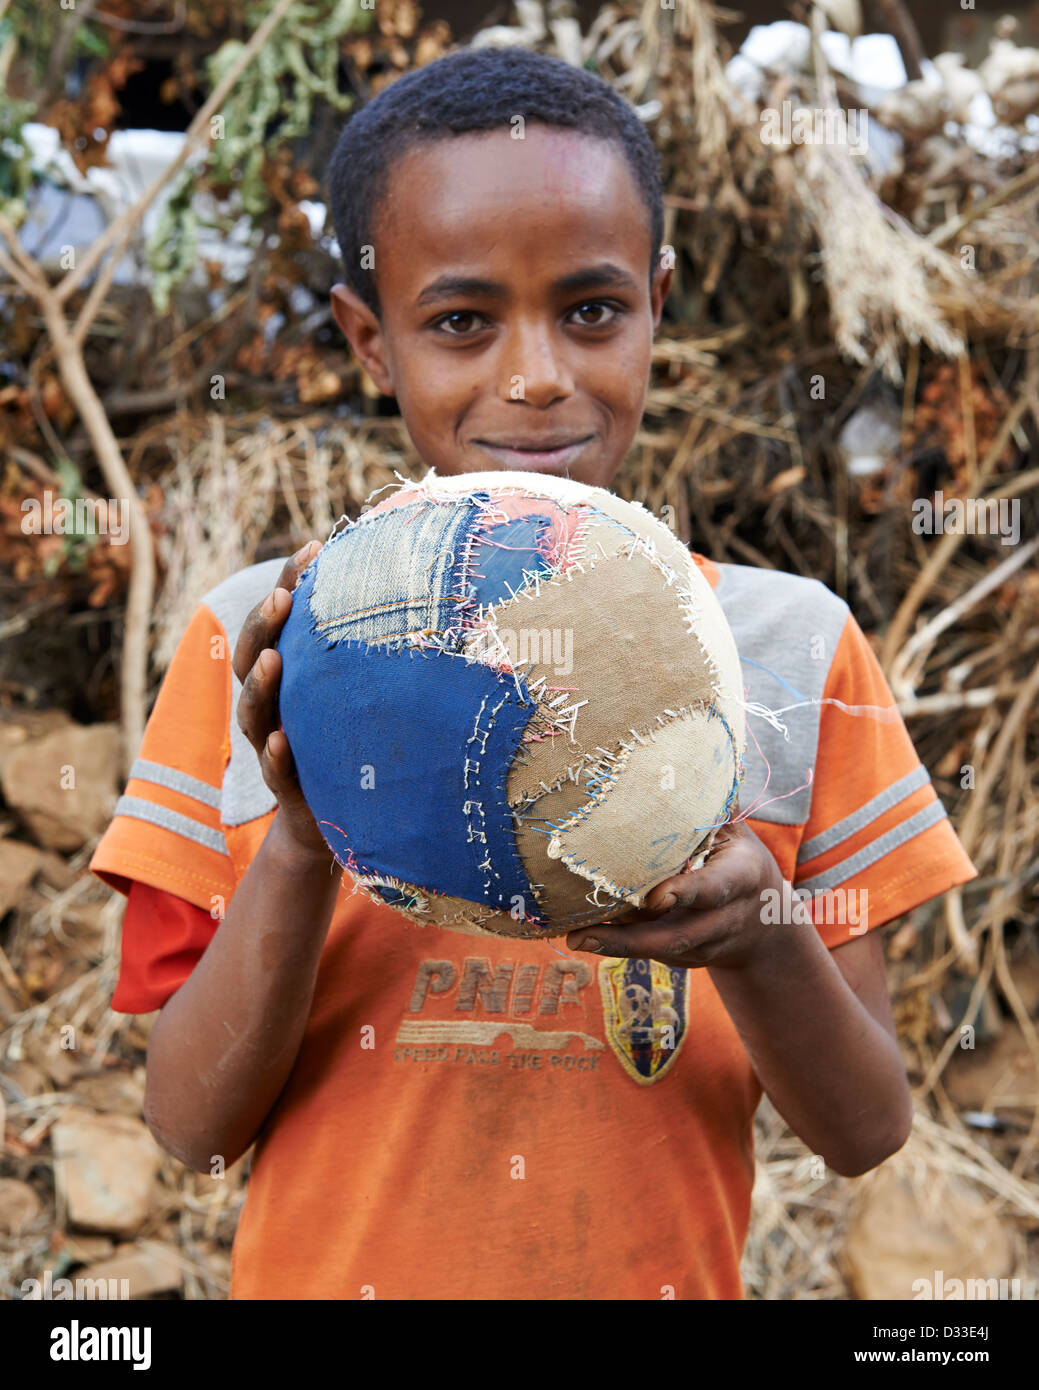 A child holding a homemade football or soccer ball Stock Photo